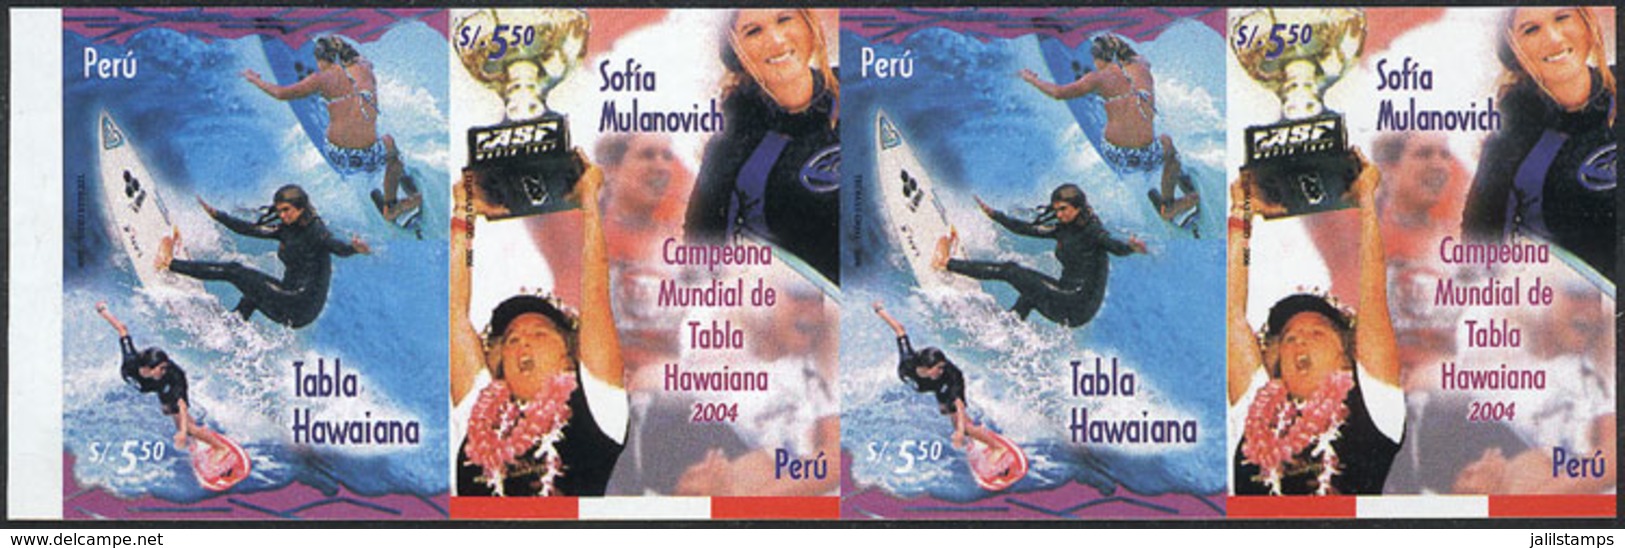 PERU: Sc.1524, 2006 Sport (surfing), IMPERFORATE STRIP Consisting Of 2 Sets, Excellent Quality, Rare! - Perú